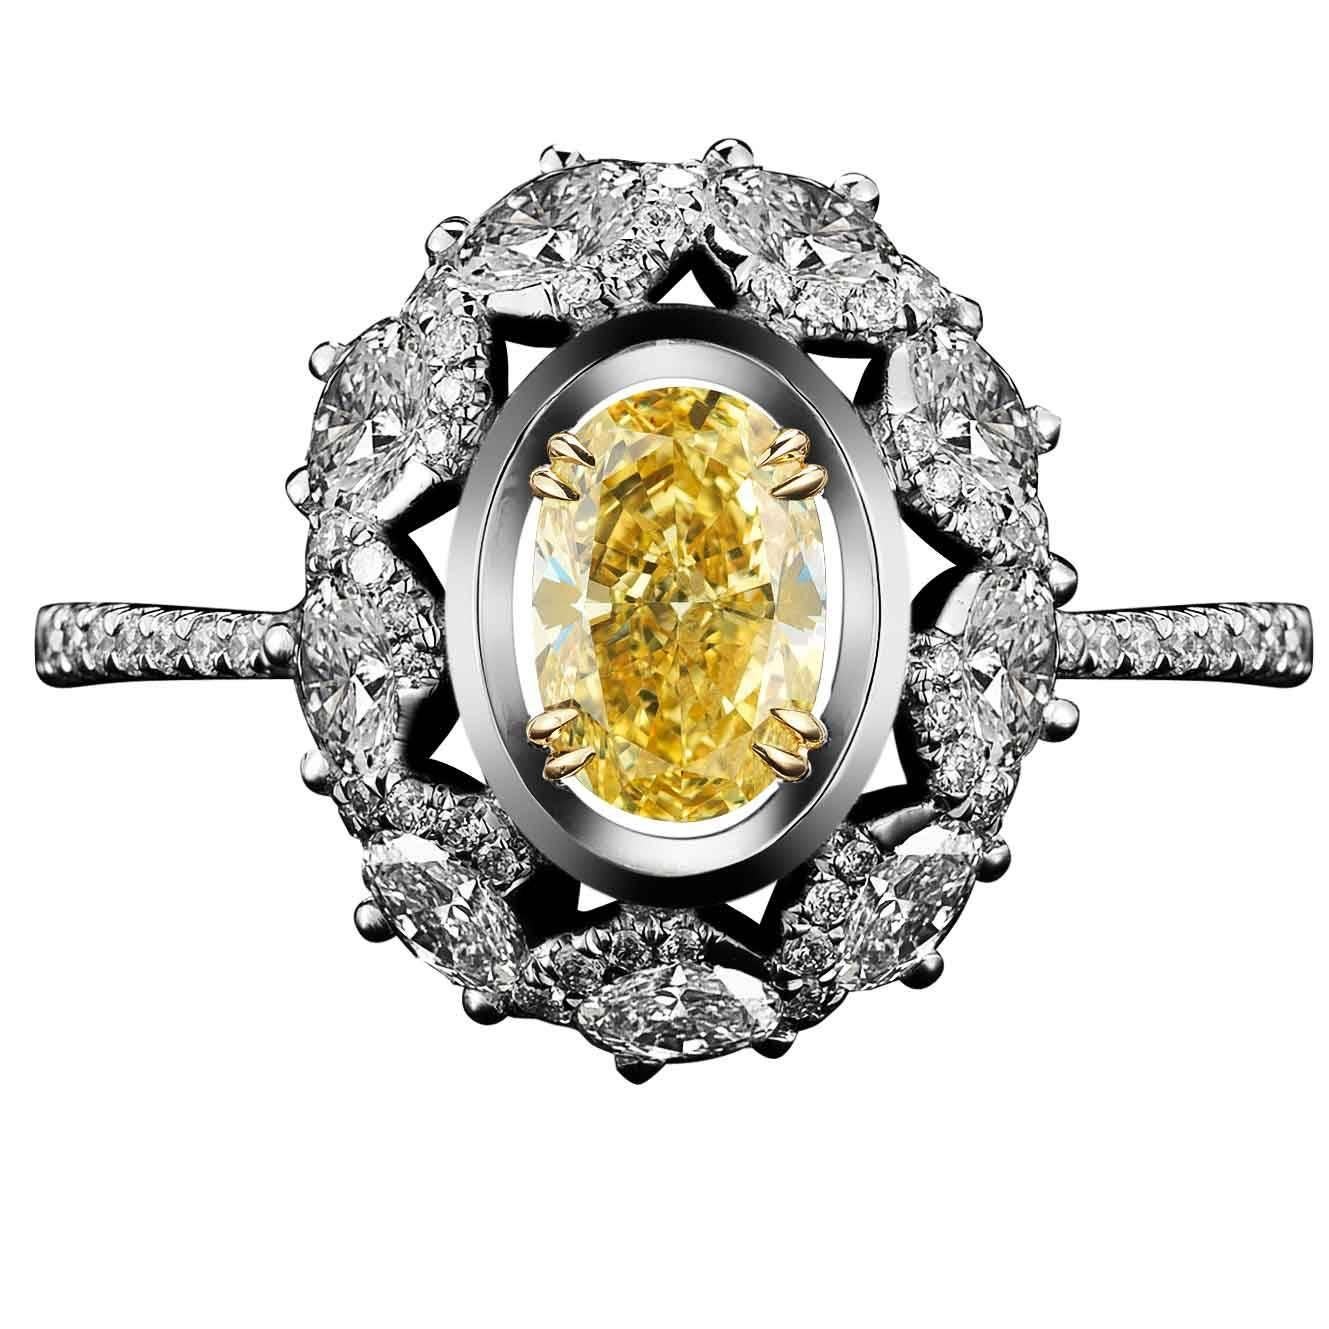 Alexandra Mor Diamond Blossom Ring with 1.77 Ct GIA Fancy Yellow Oval Diamond For Sale